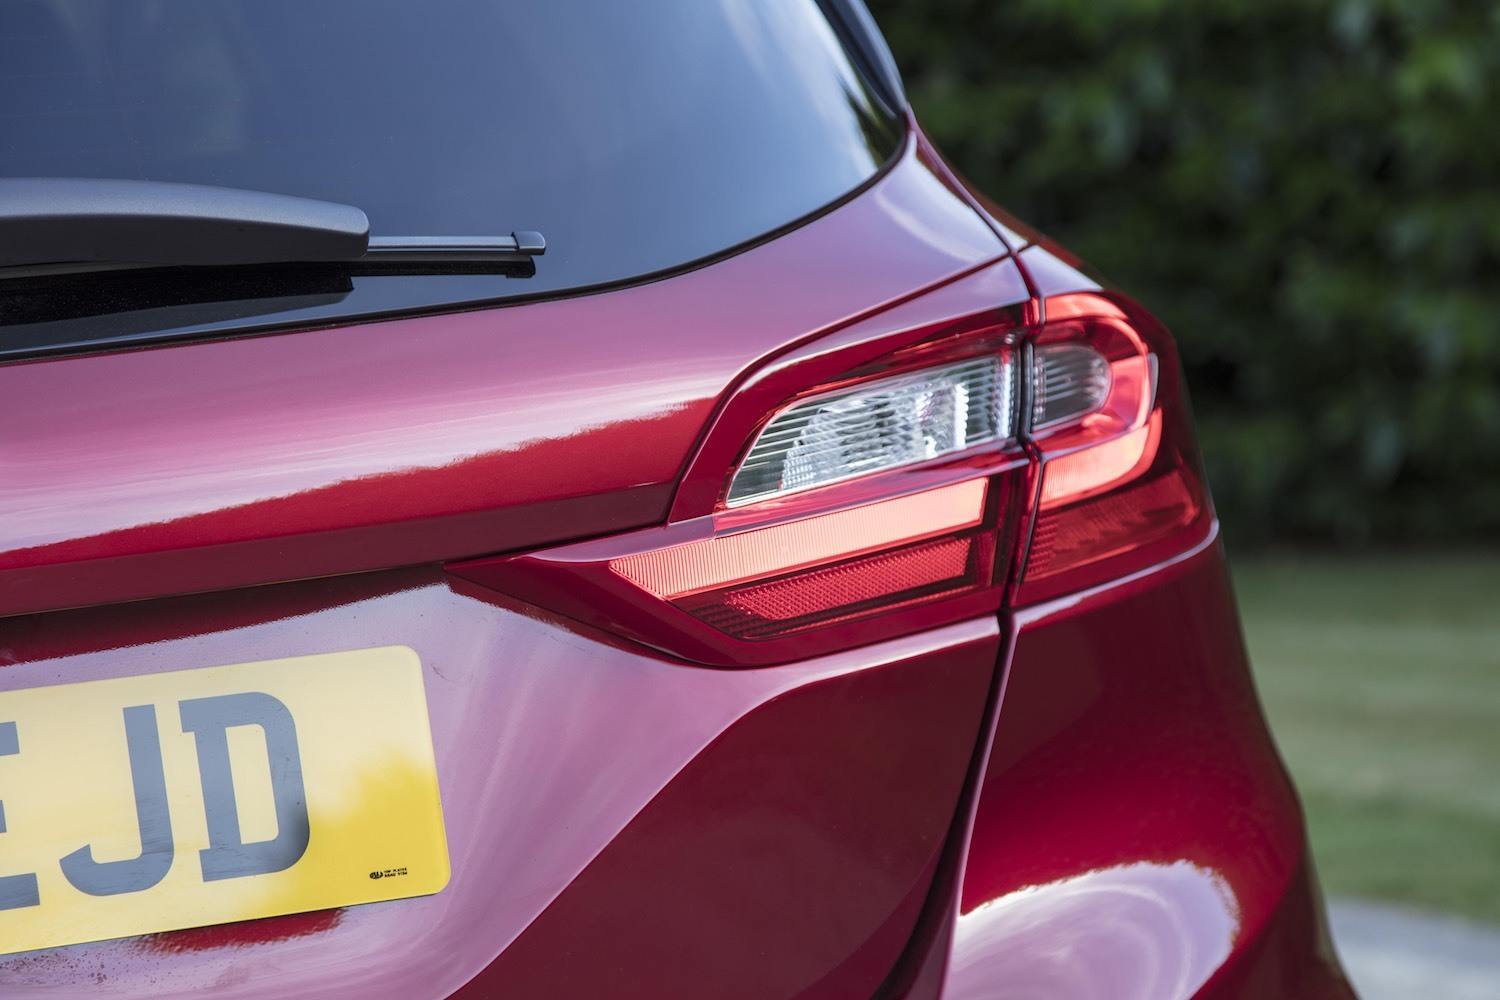 Tom Scanlan reviews the All New Ford Fiesta for Drive 23